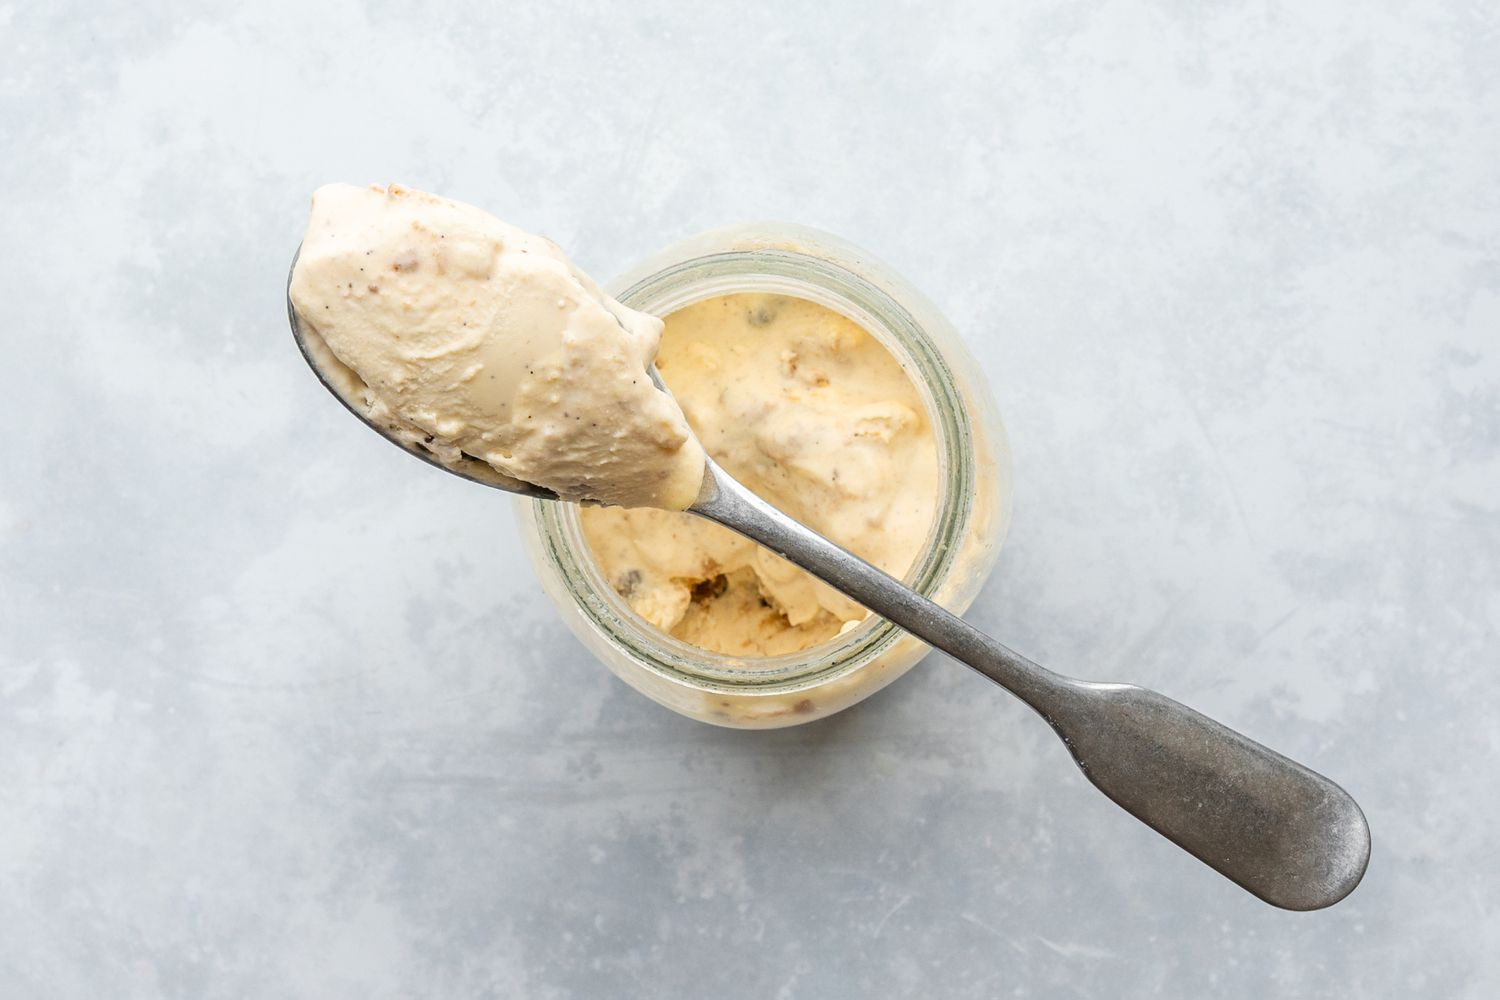 A spoon holding a scoop of the ice cream mixture 